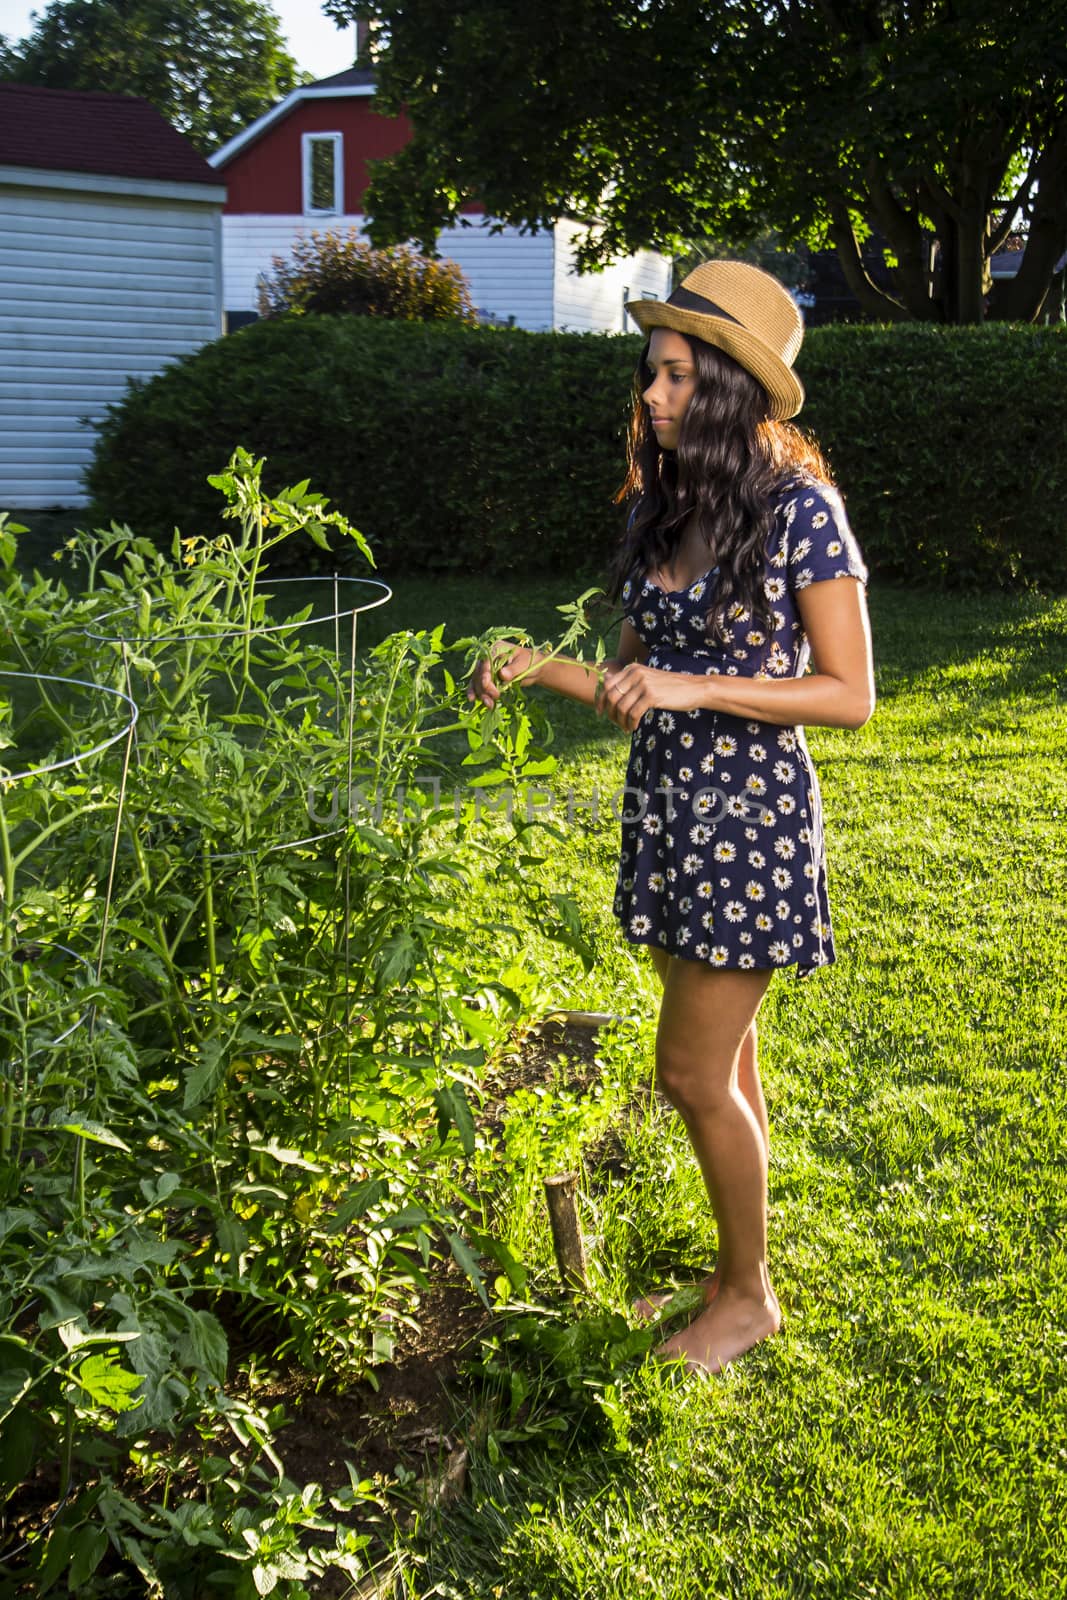 young woman in her twenties review a tomato plant